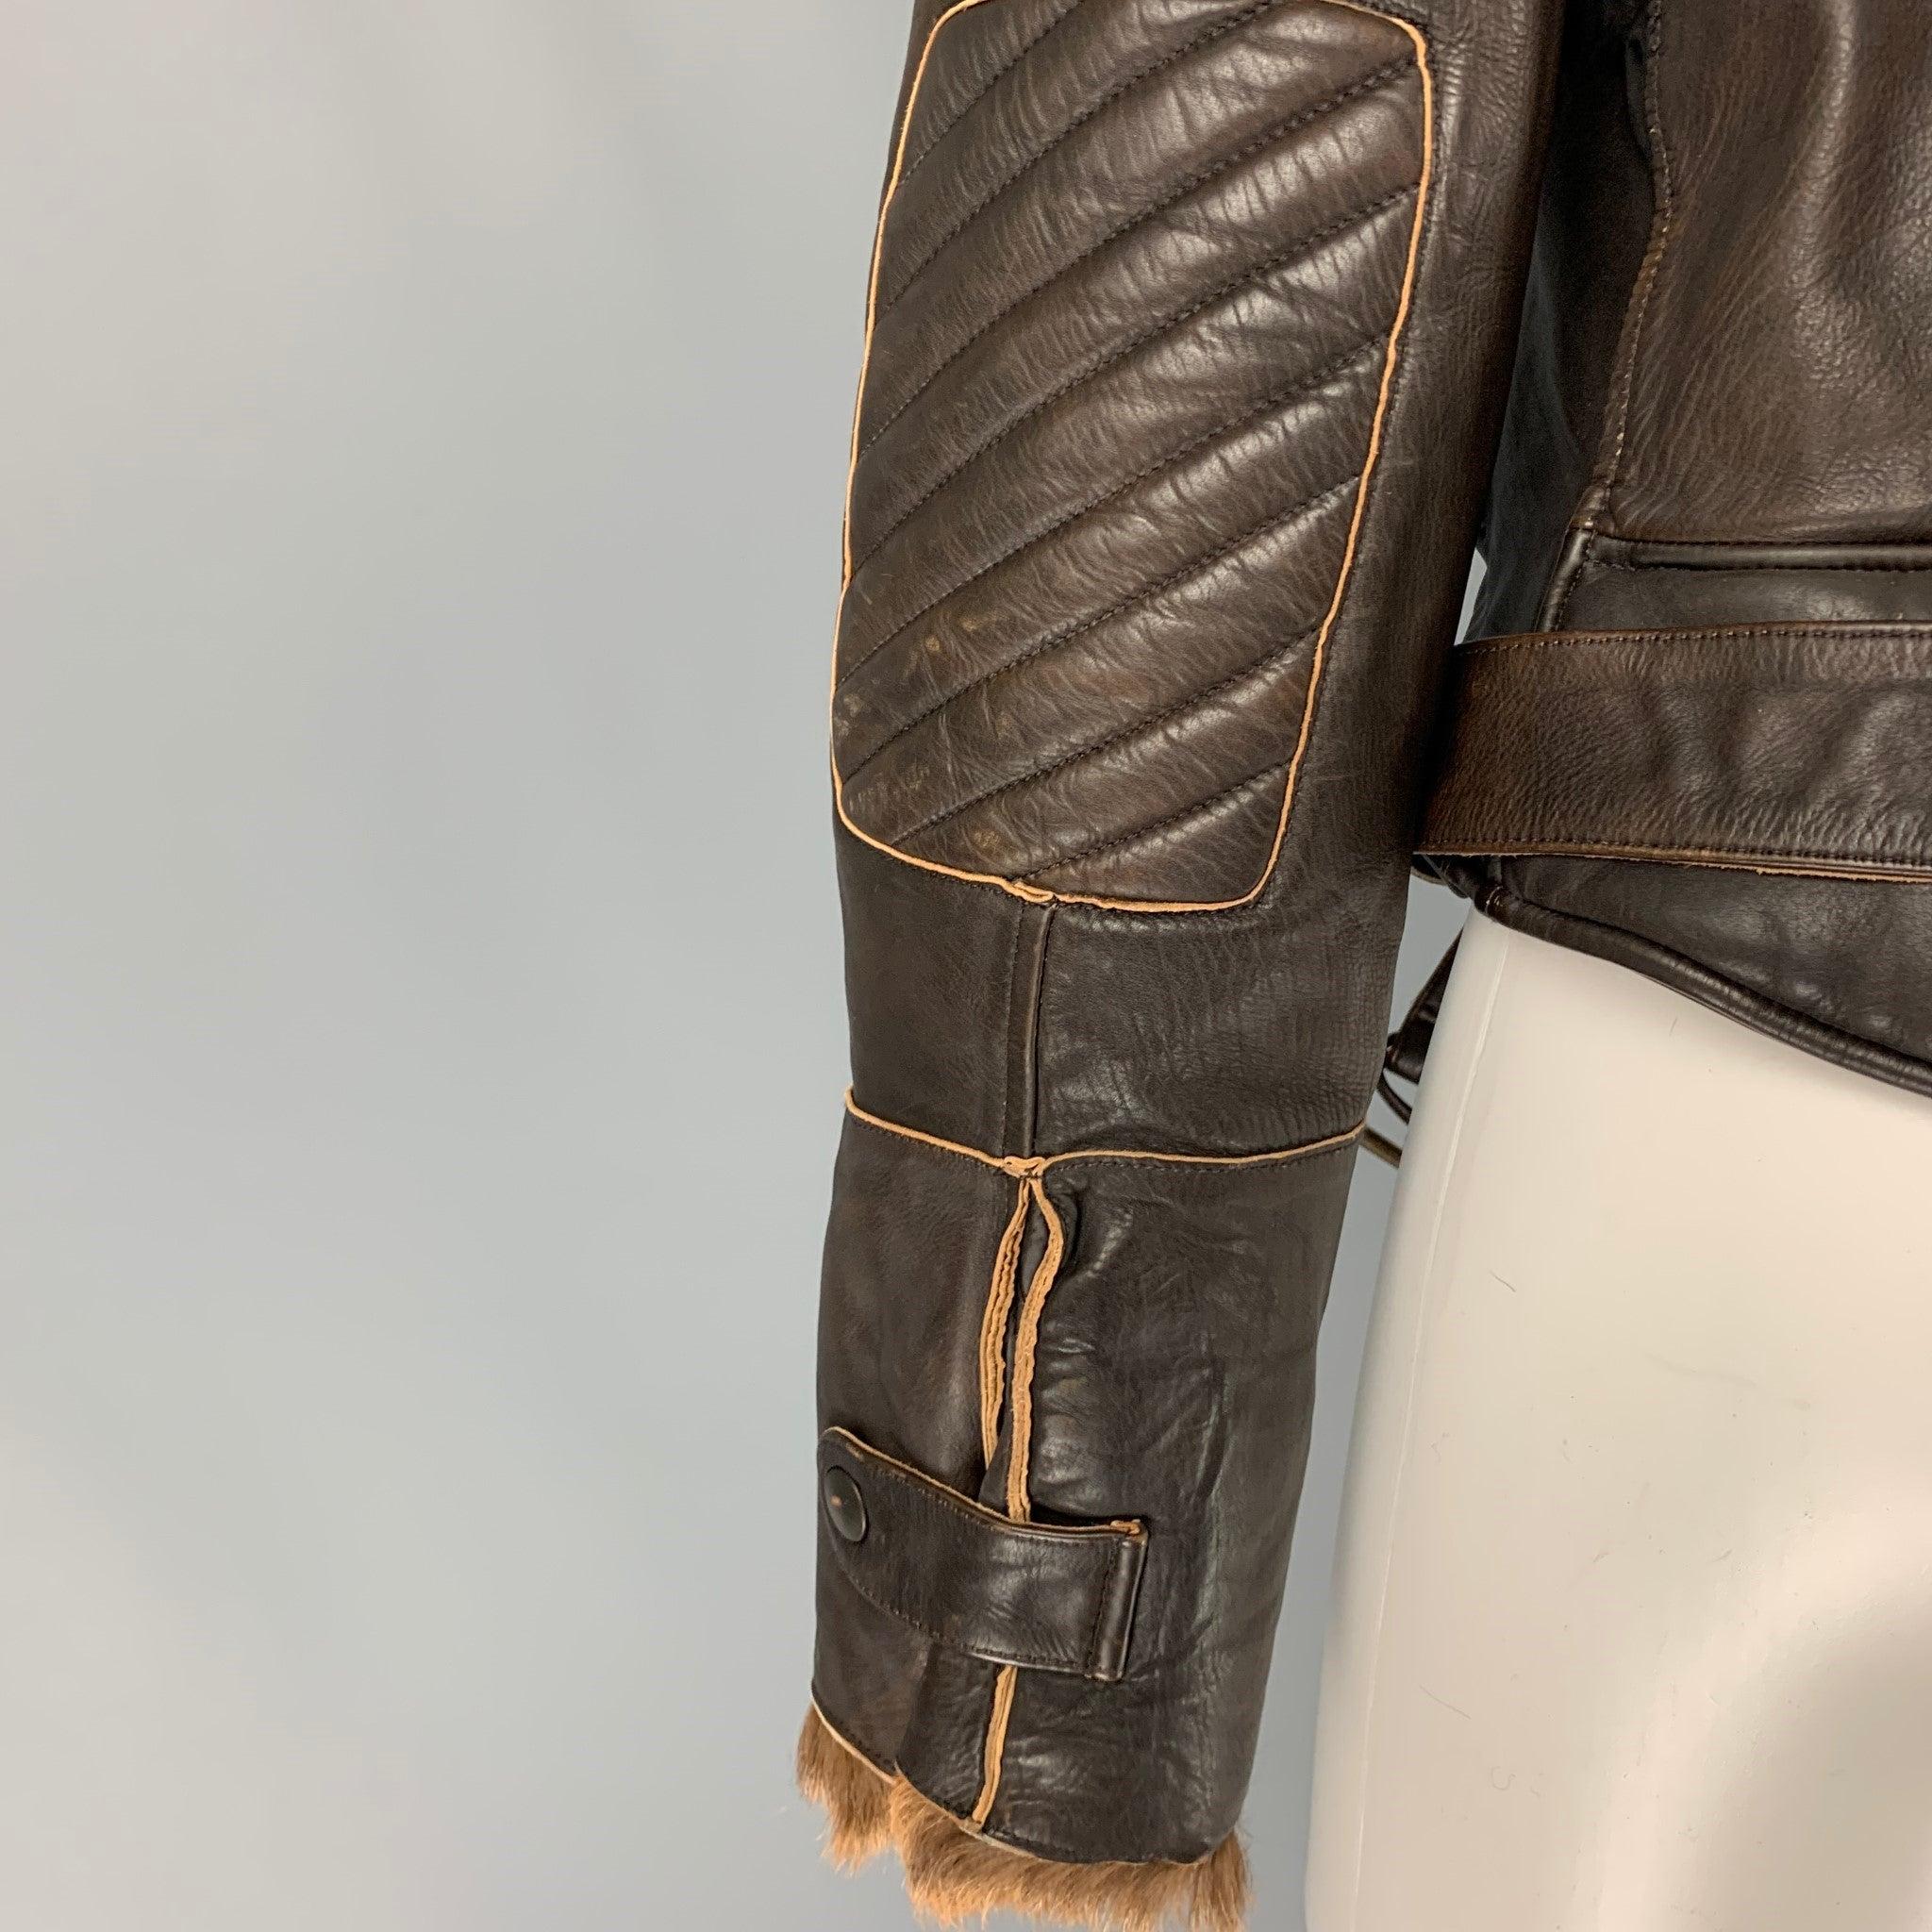 Women's HENRY BEGUELIN Size 4 Brown & Tan Chamois Leather Motorcycle Jacket For Sale